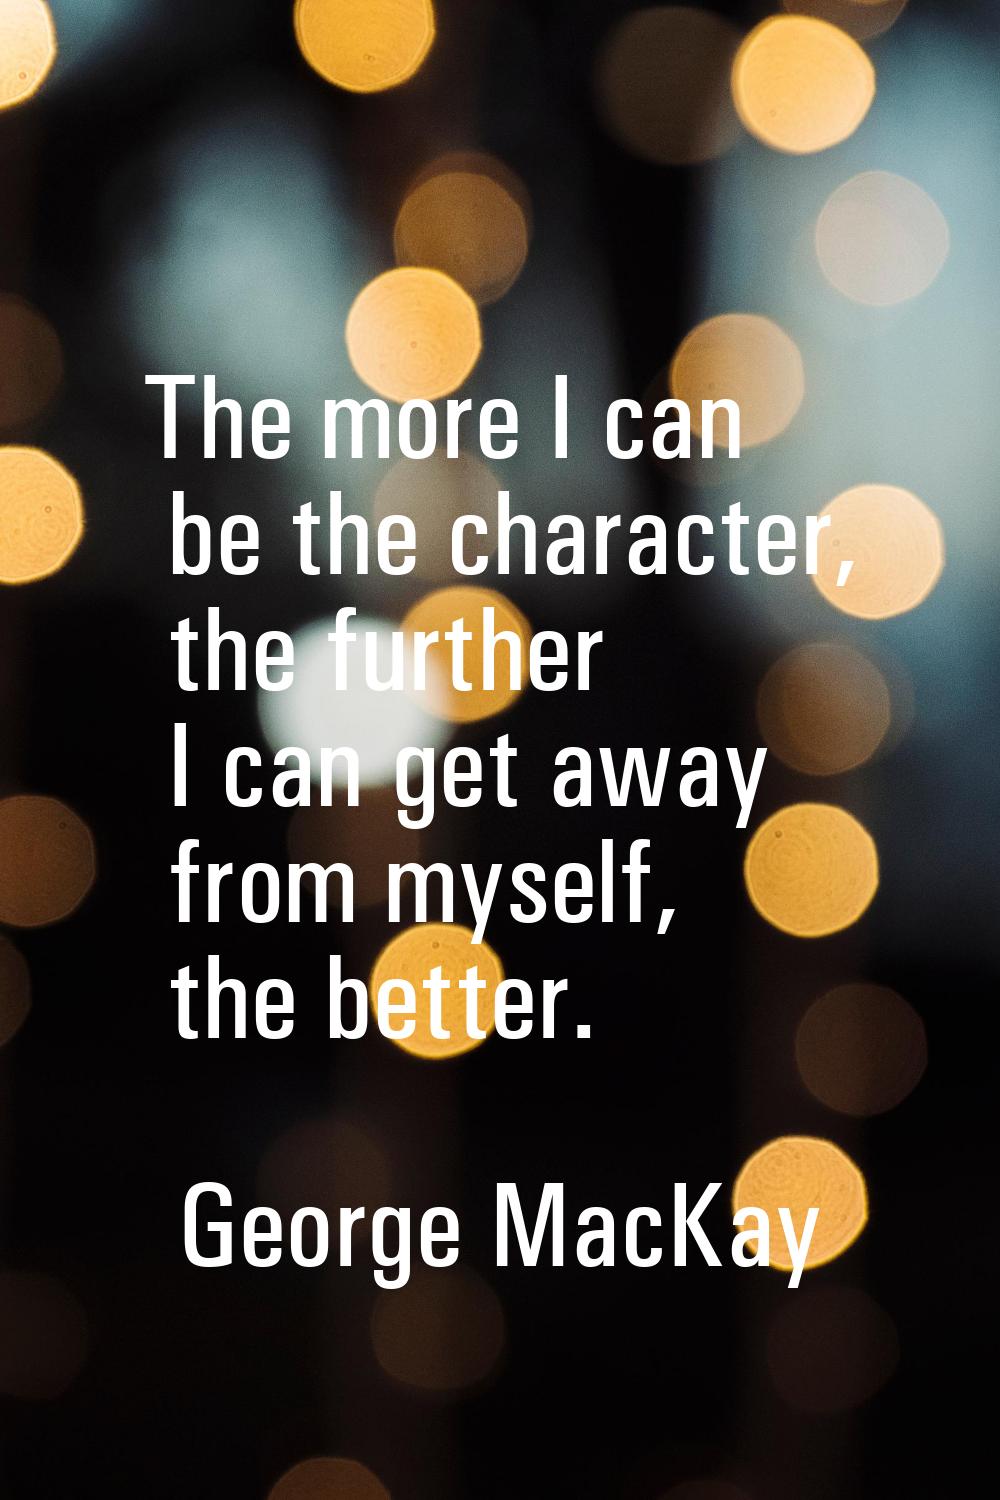 The more I can be the character, the further I can get away from myself, the better.